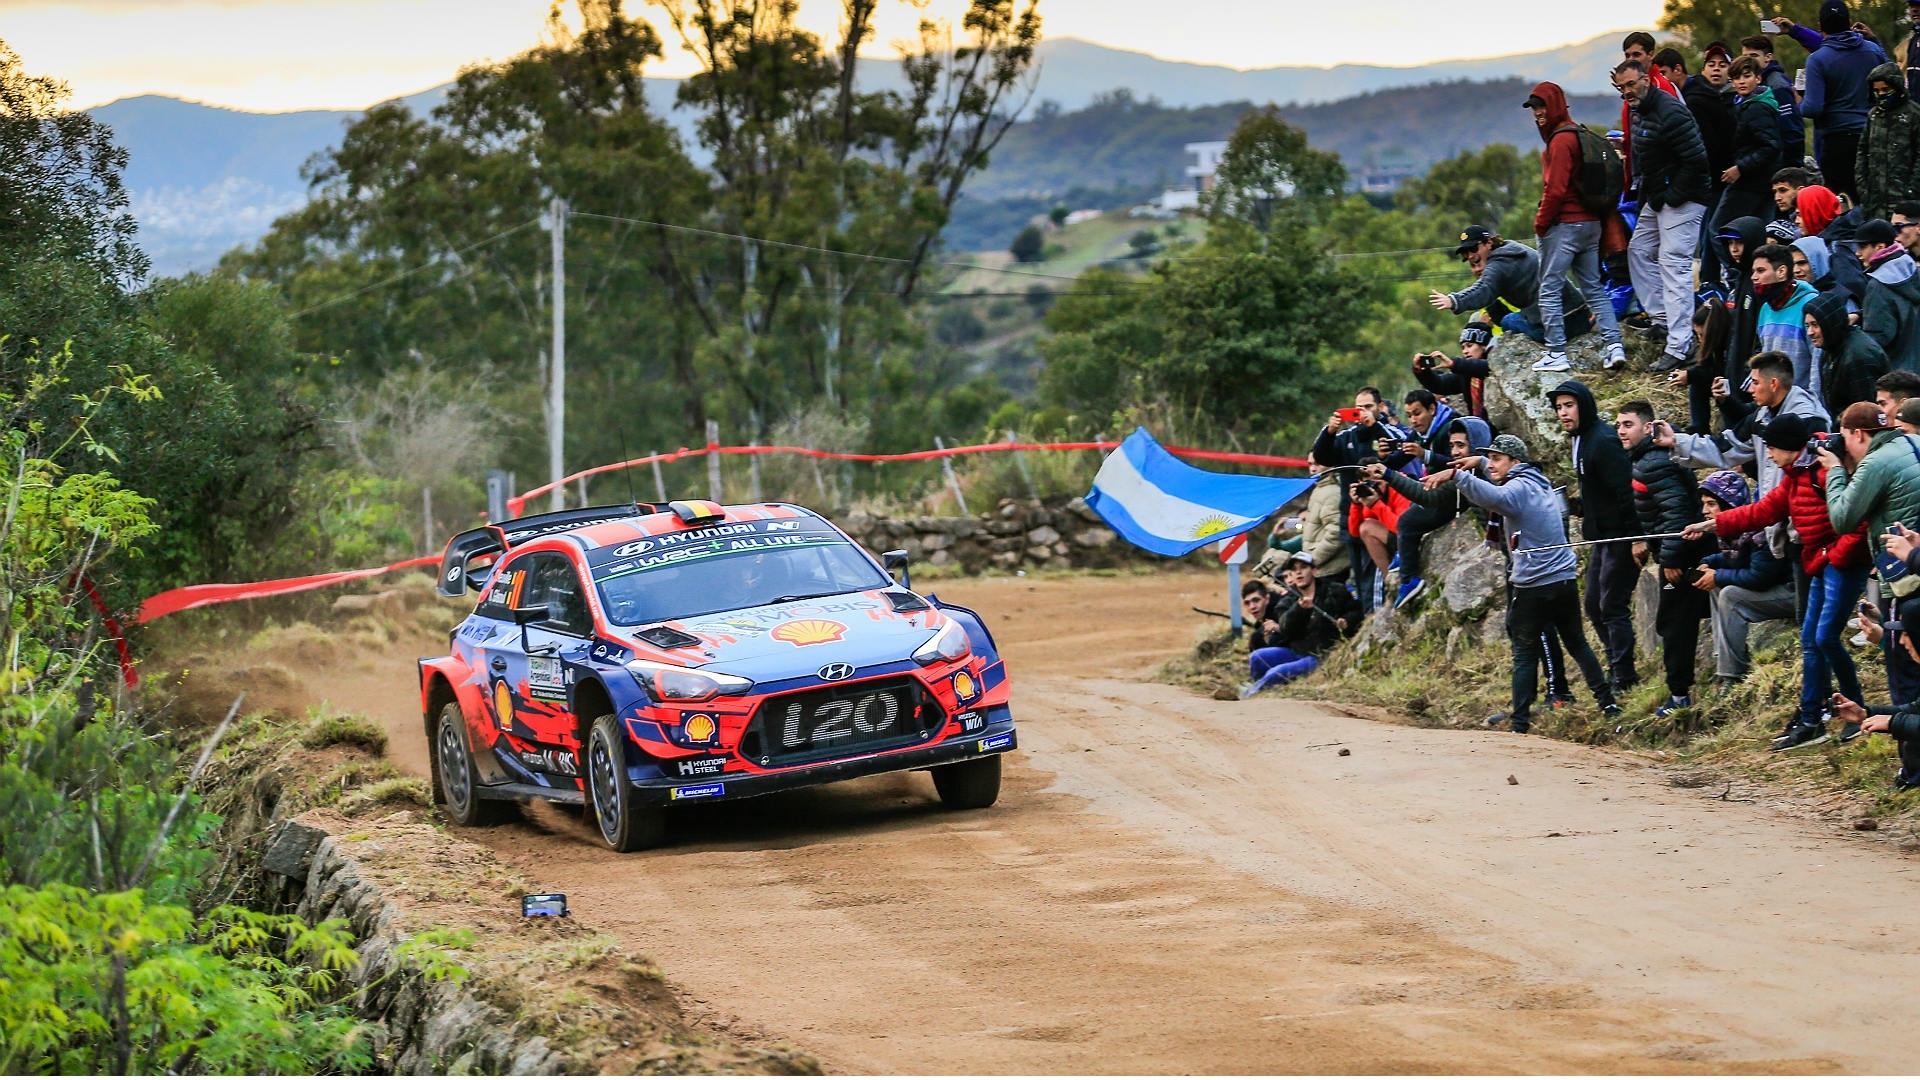 Saturday in Argentina: Neuville in the clear